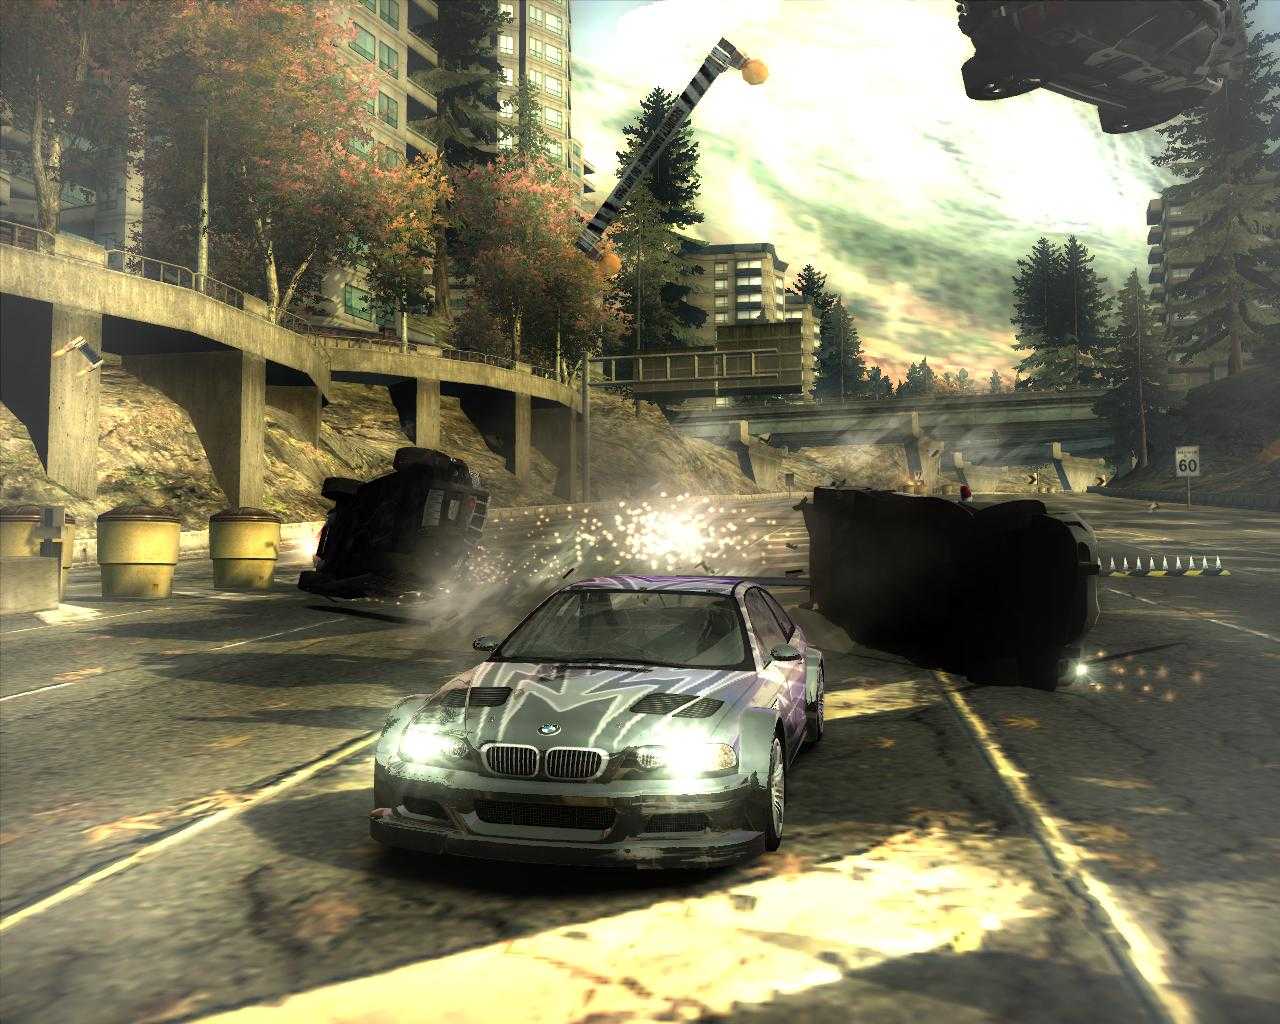 Nfs mw cars. Игра NFS most wanted 2005. Нфс мост вантед 2005. Гонки NFS most wanted 2005. NFS мост вантед 2005.